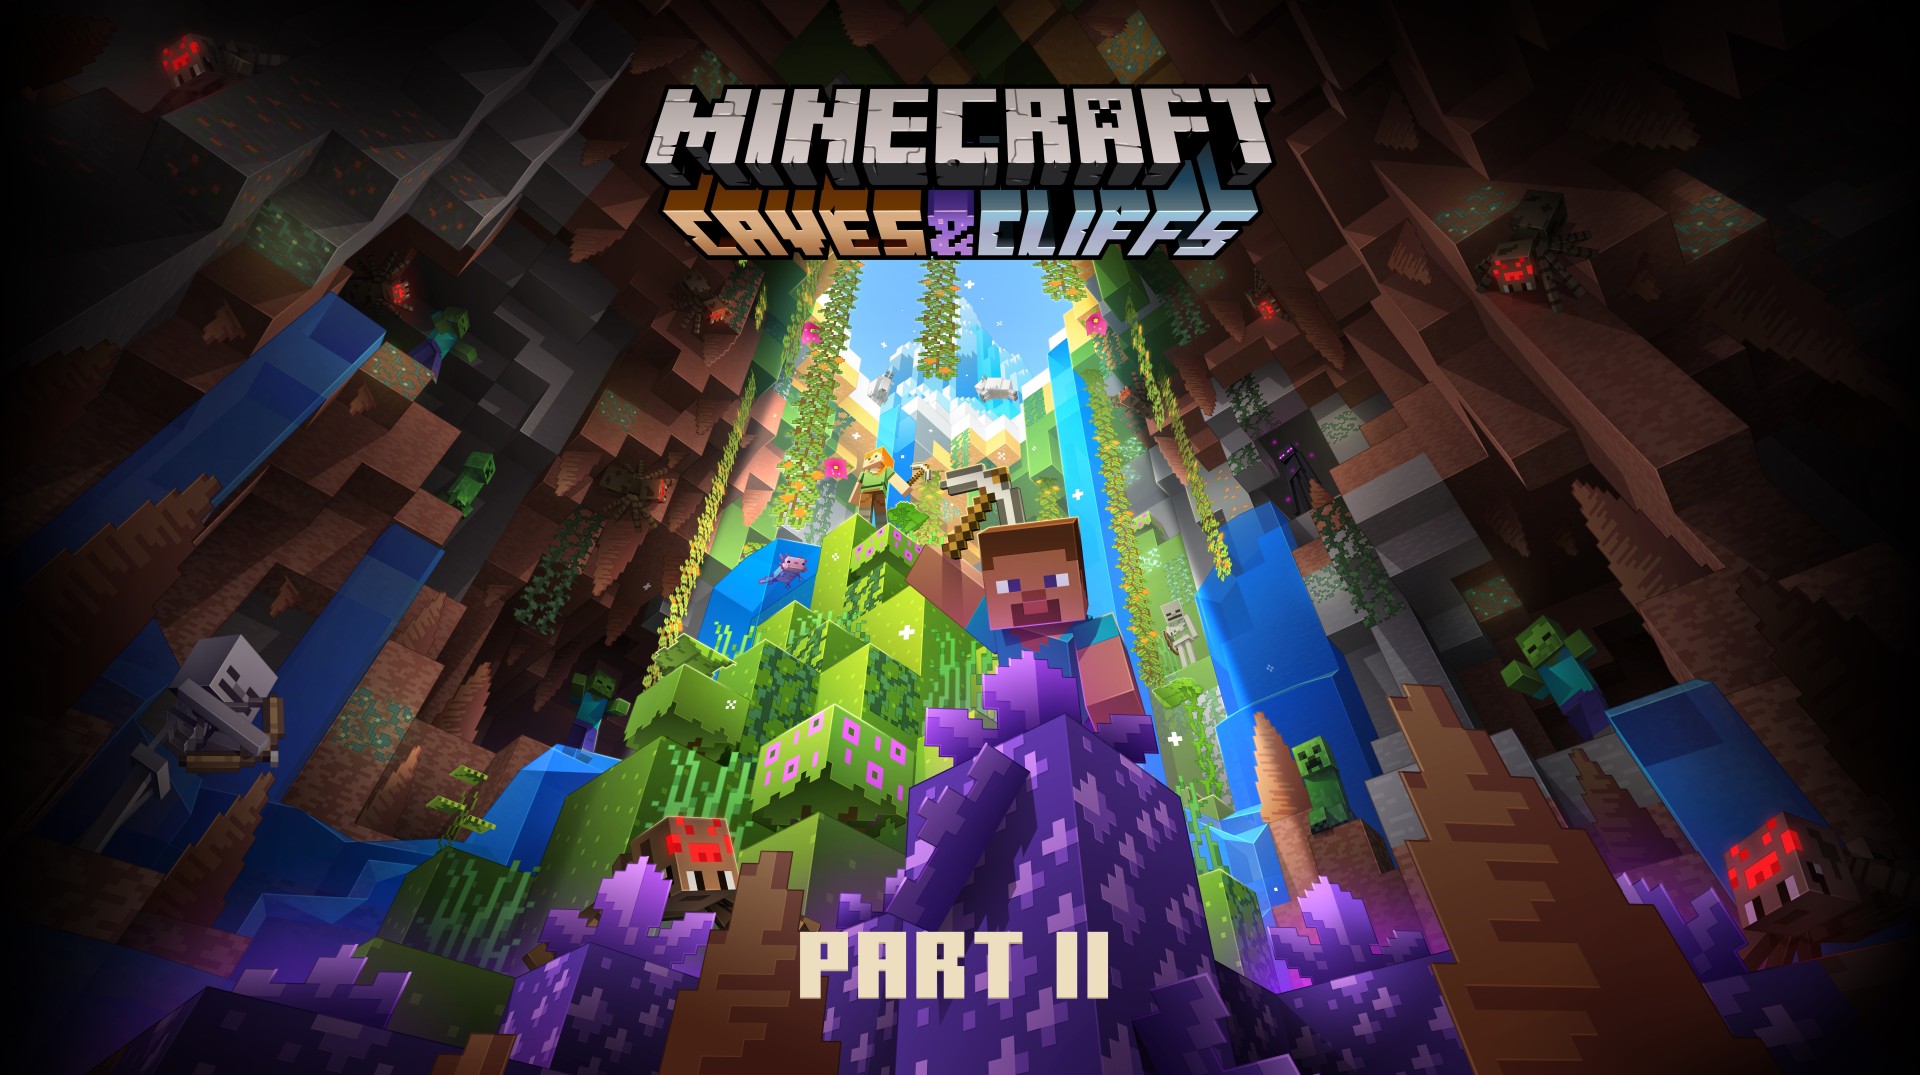 The Caves & Cliffs Part II Update is here